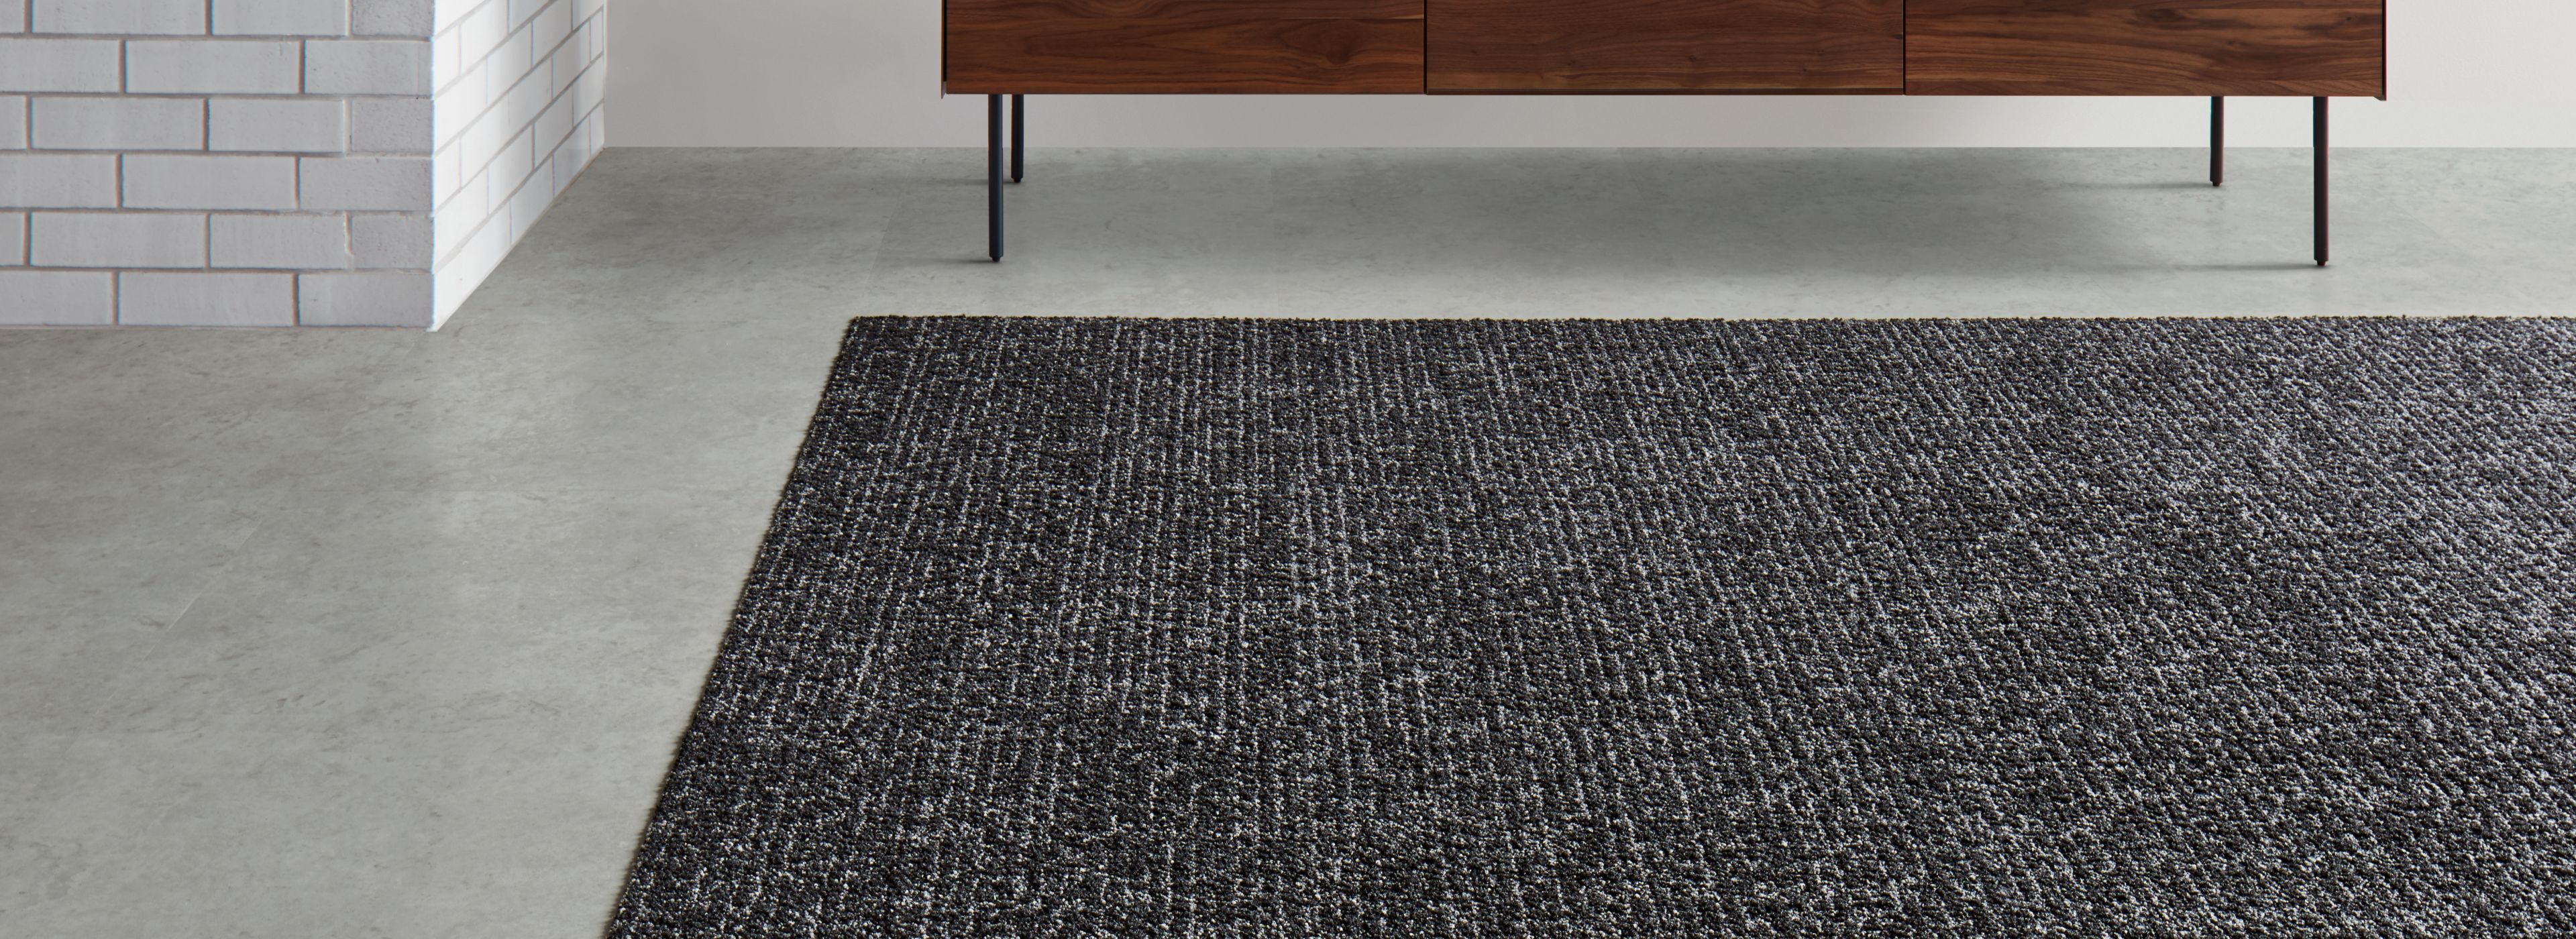 Interface Classic Seven carpet tile with Textured Stones LVT in lobby area  image number 1